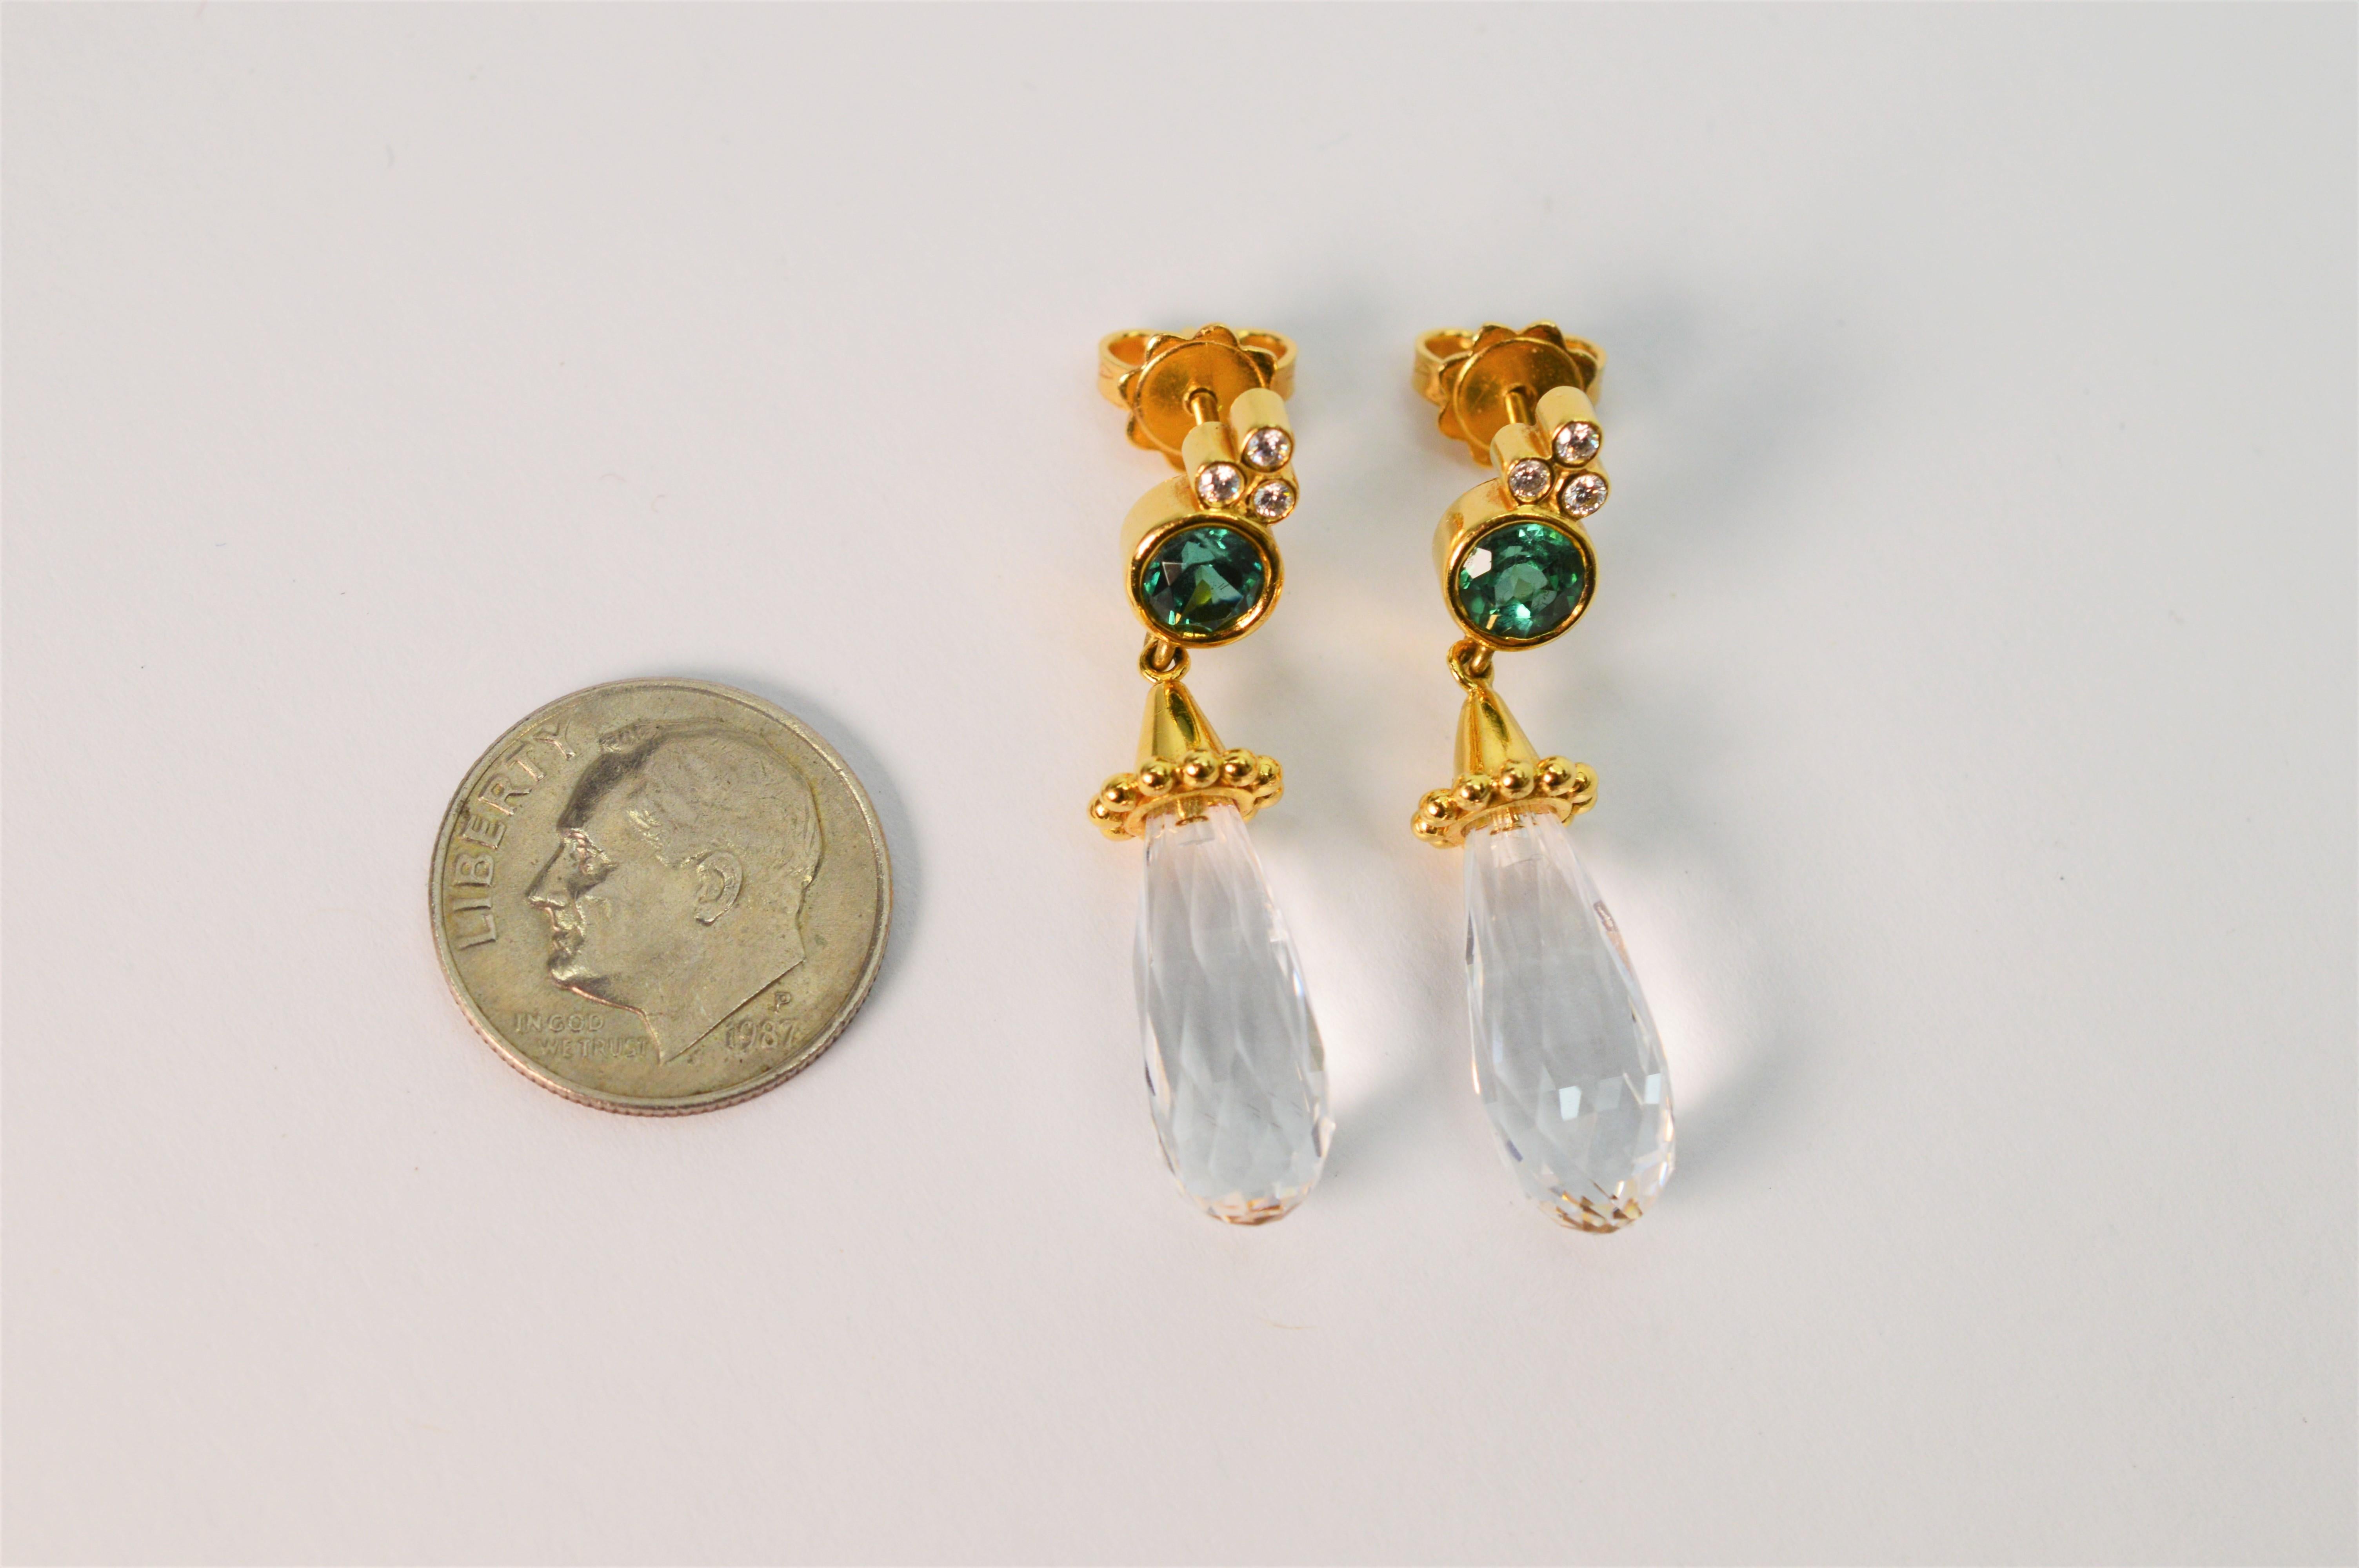 Briolette Rock Crystal Yellow Gold Drop Earrings w Emerald Diamond Accents In Excellent Condition For Sale In Mount Kisco, NY